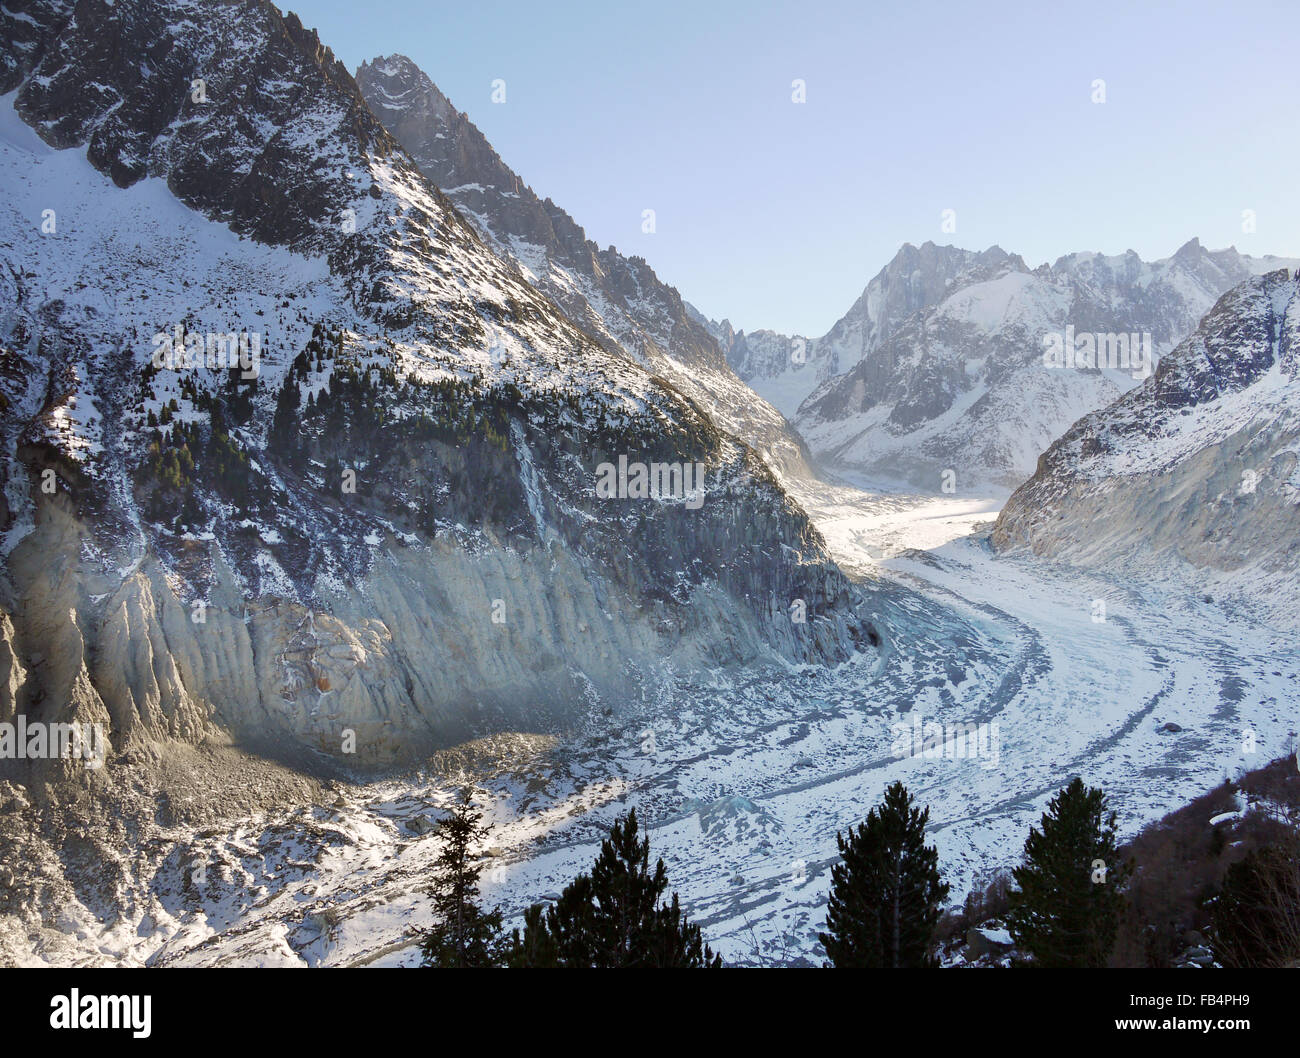 Mer de Glace showing the moraines left from the retreating glacier Chamonix France Stock Photo